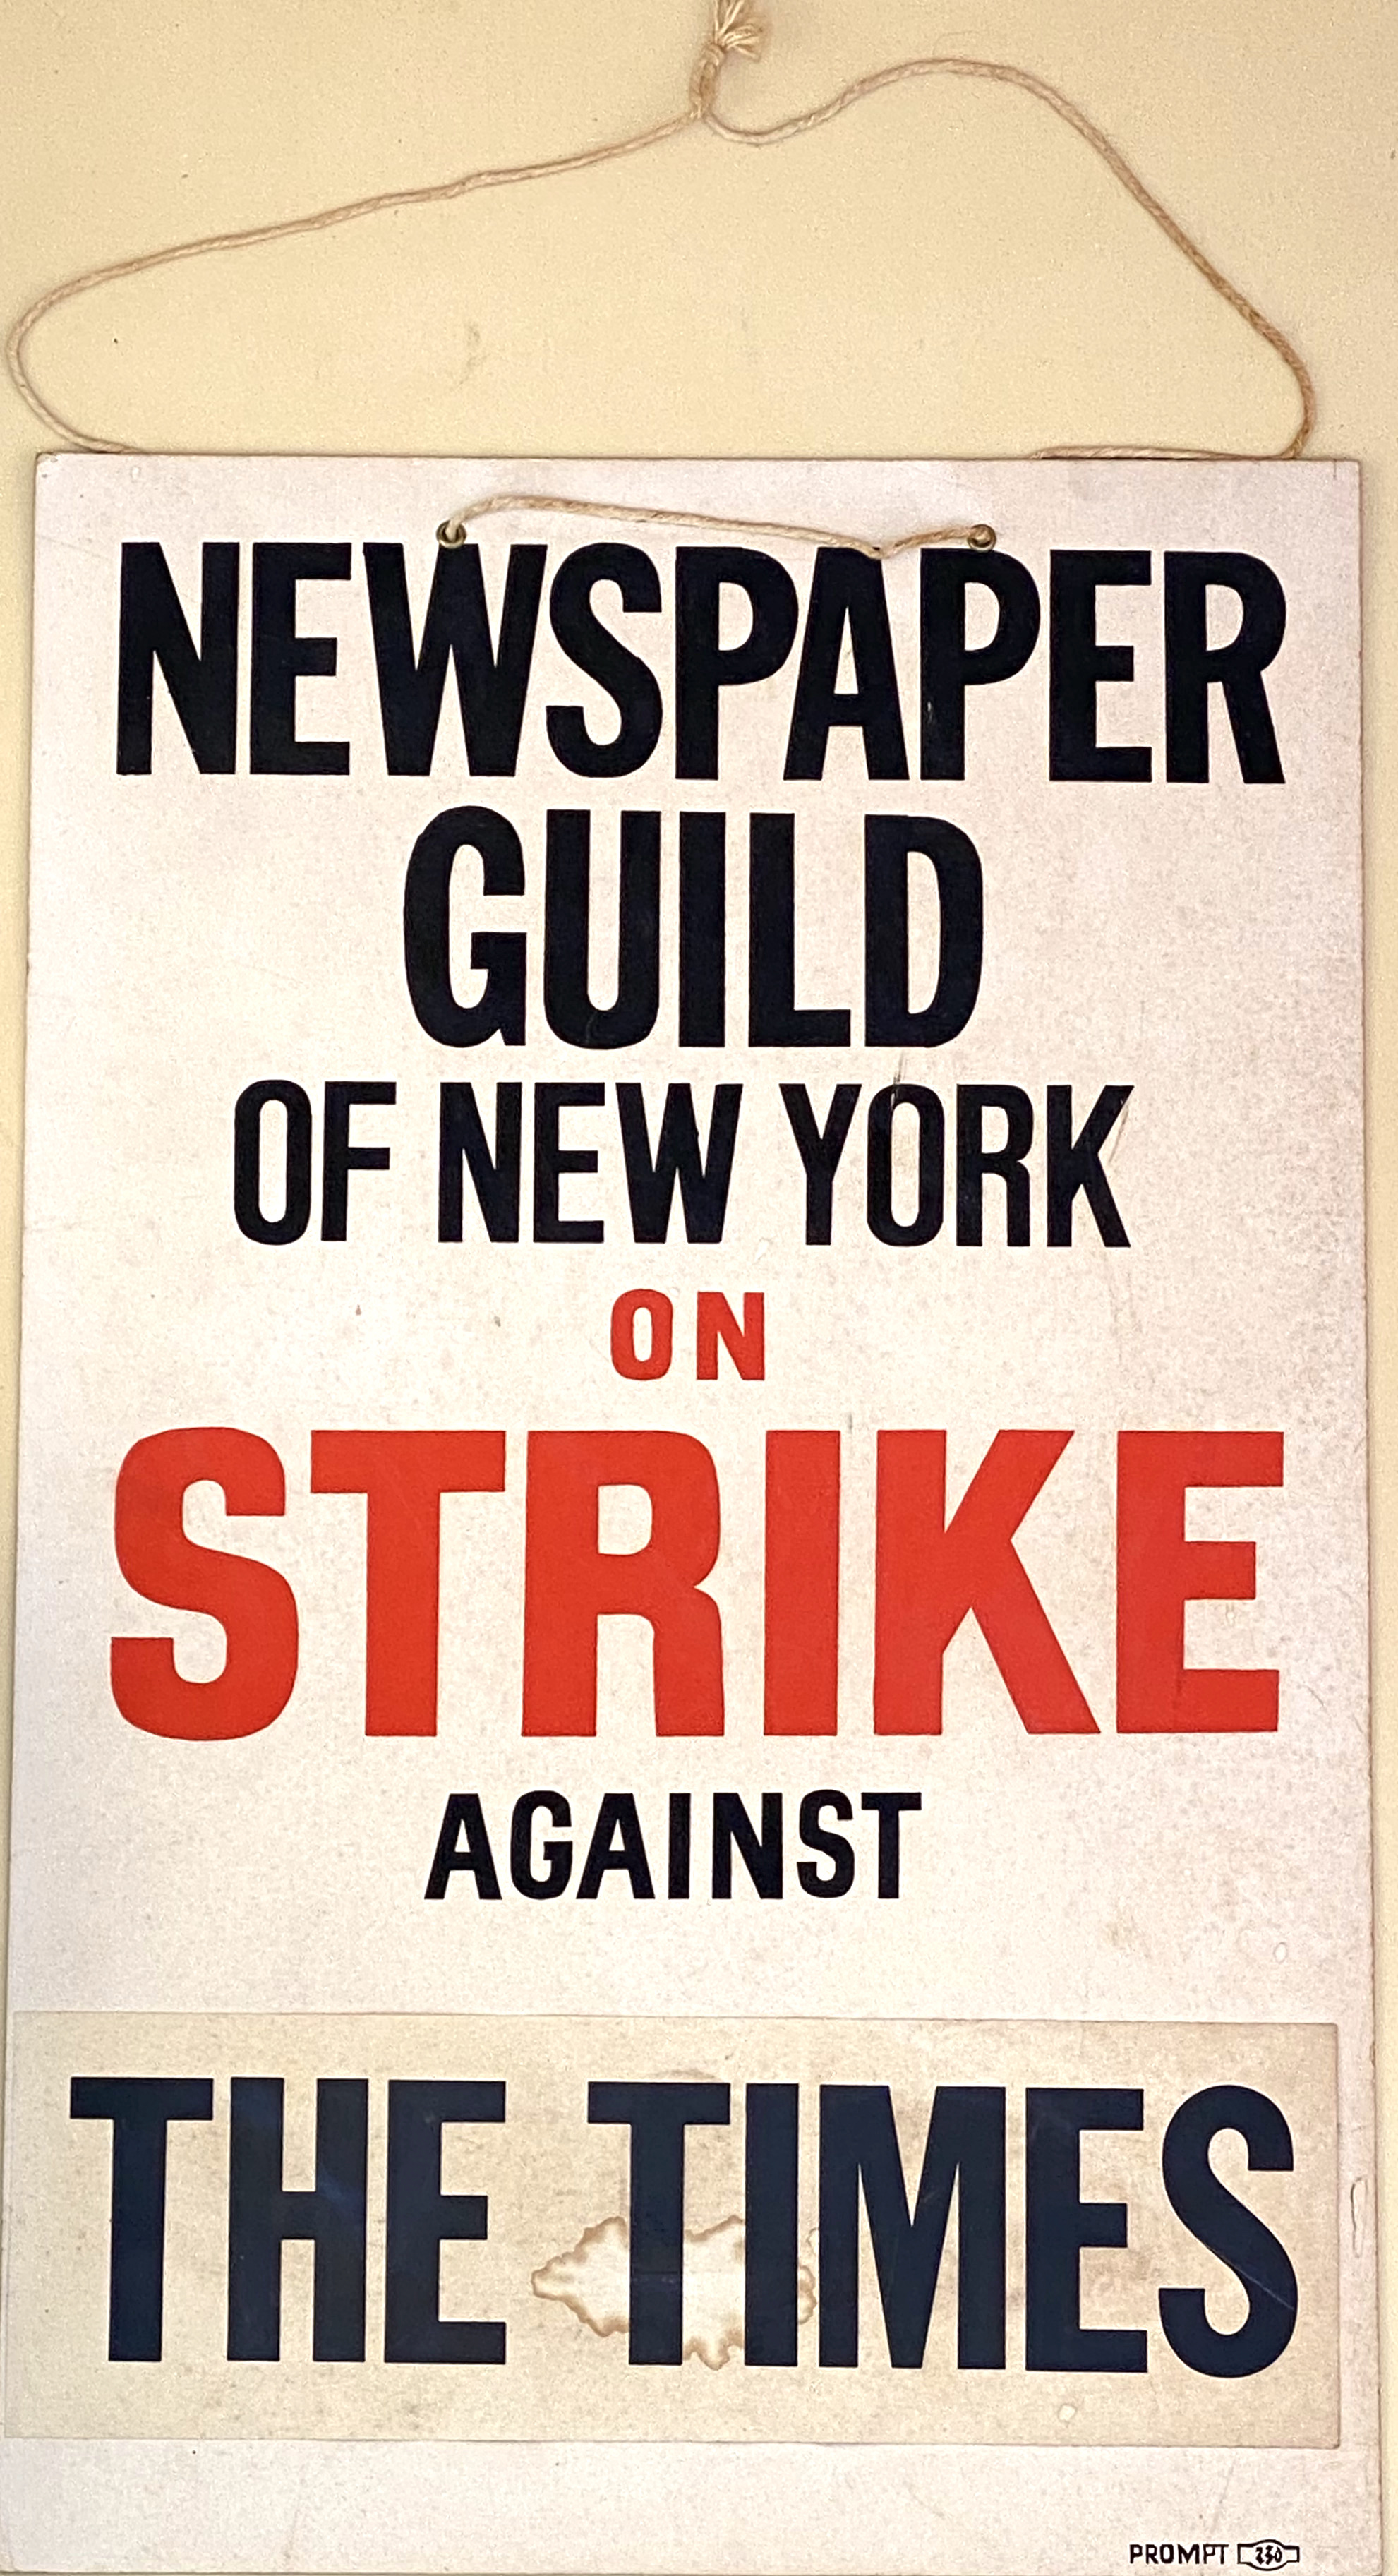 Newspaper Guild of New York on Strike against The Times sign